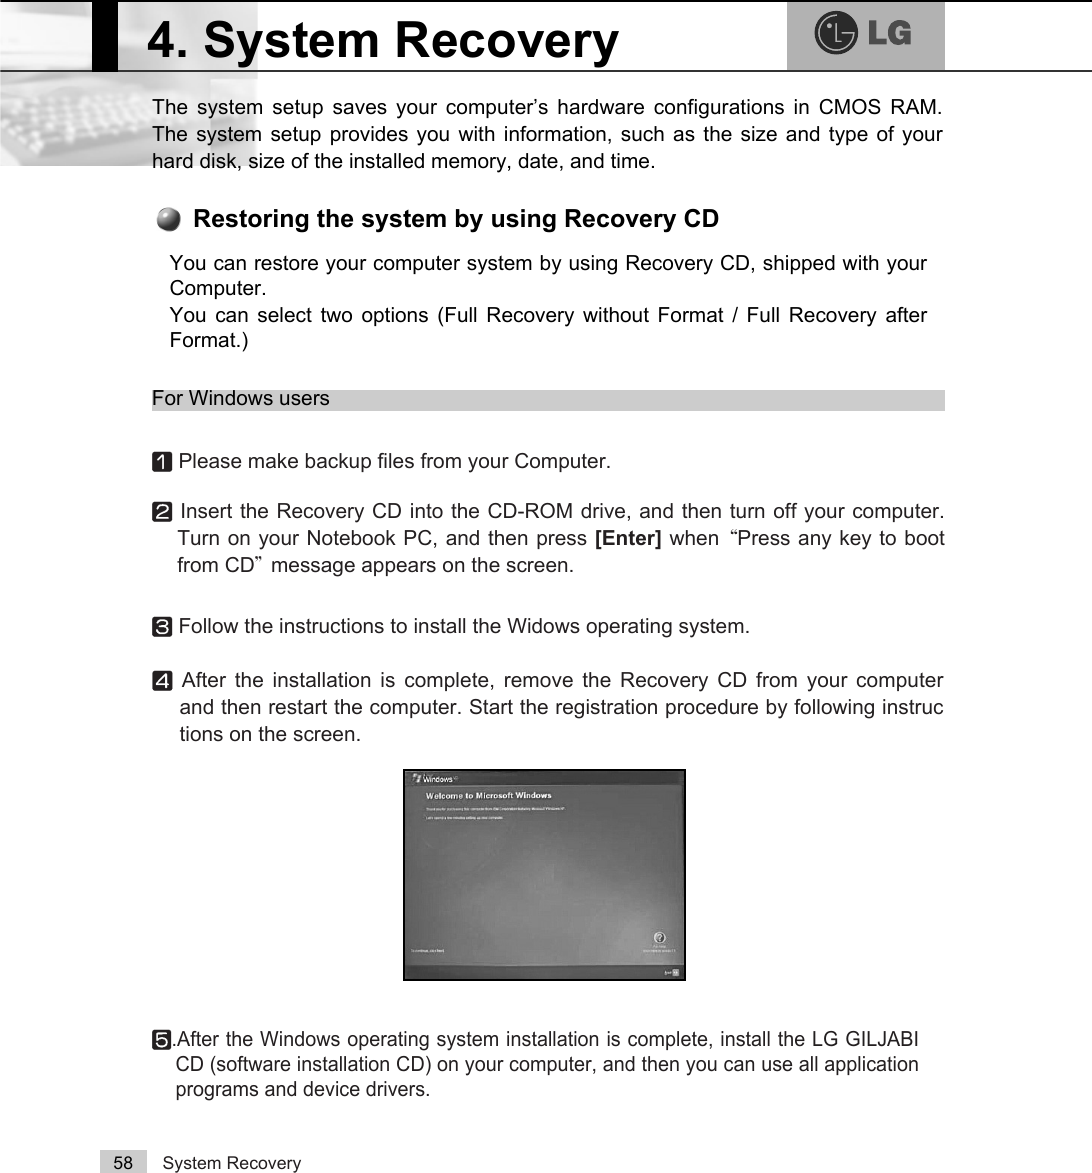 System Recovery58The system setup saves your computer’s hardware configurations in CMOS RAM.The system setup provides you with information, such as the size and type of yourhard disk, size of the installed memory, date, and time.4. System RecoveryⓞPlease make backup files from your Computer.ⓟInsert the Recovery CD into the CD-ROM drive, and then turn off your computer.Turn on your Notebook PC, and then press [Enter] when ²Press any key to bootfrom CD³message appears on the screen.ⓠFollow the instructions to install the Widows operating system.ⓡAfter the installation is complete, remove the Recovery CD from your computerand then restart the computer. Start the registration procedure by following instructions on the screen.ⓢ.After the Windows operating system installation is complete, install the LG GILJABICD (software installation CD) on your computer, and then you can use all applicationprograms and device drivers. You can restore your computer system by using Recovery CD, shipped with yourComputer.You can select two options (Full Recovery without Format / Full Recovery afterFormat.) Restoring the system by using Recovery CDFor Windows users